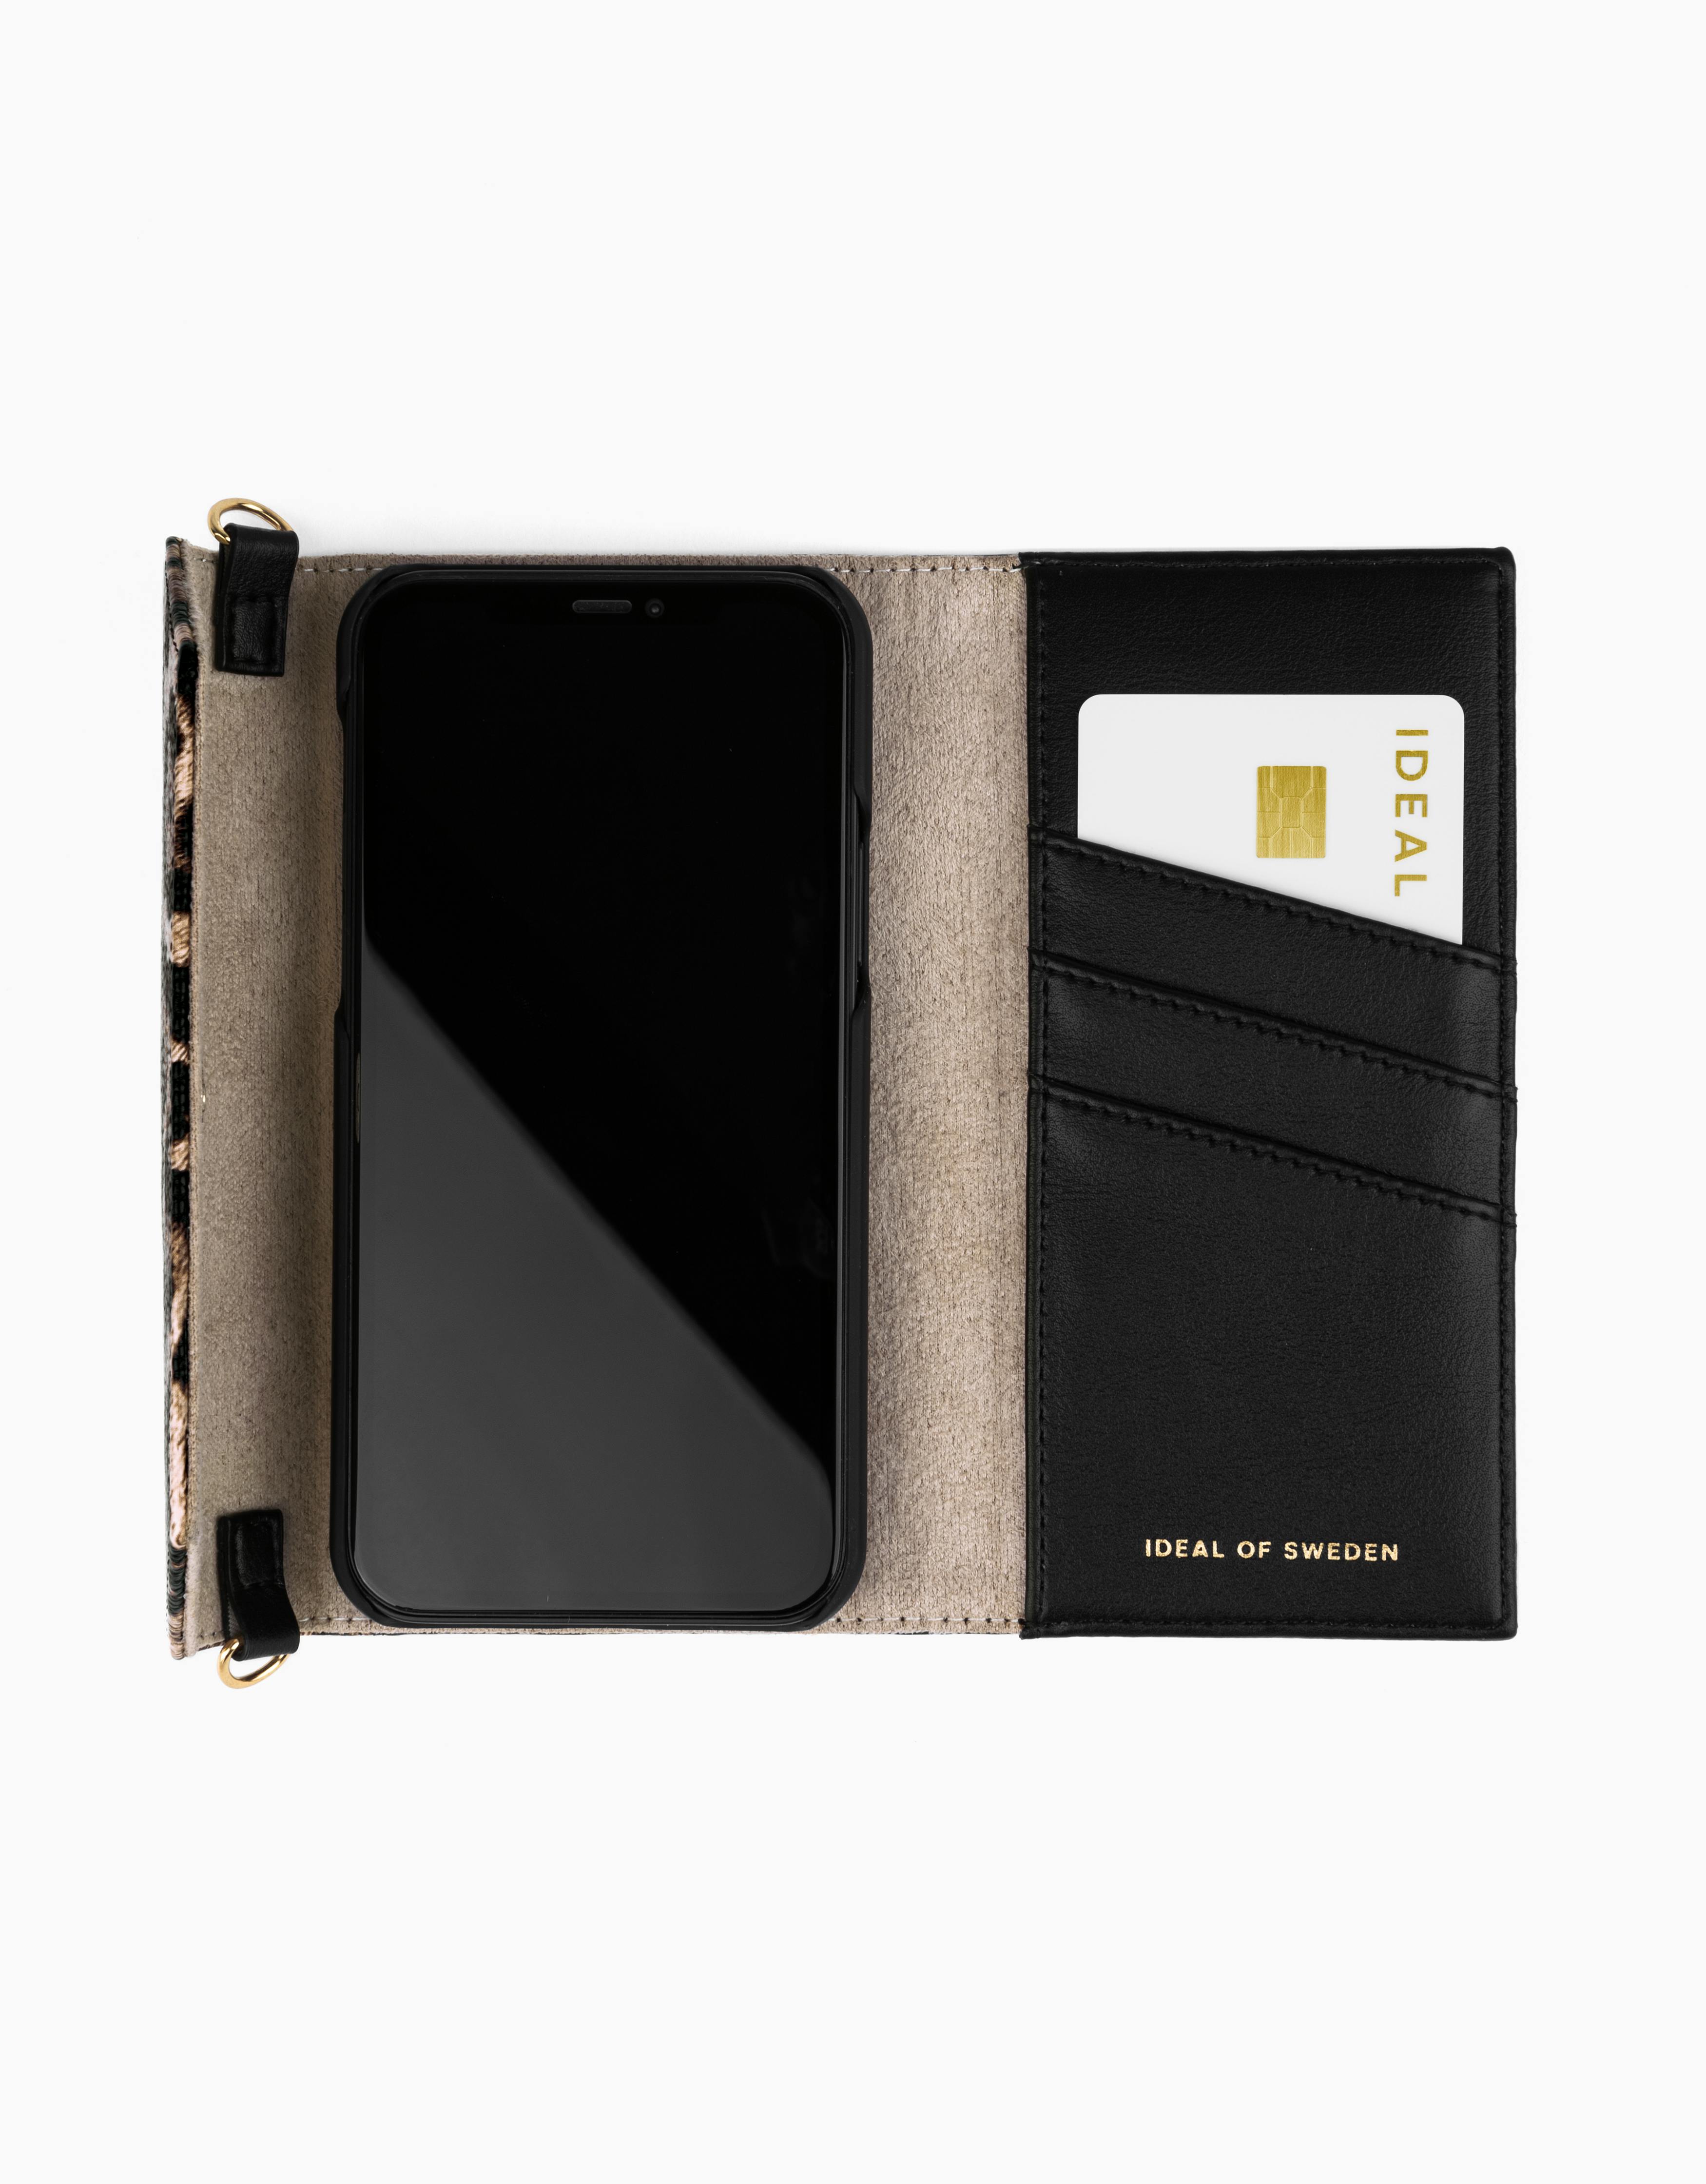 IDEAL OF SWEDEN Cassette Clutch Case for iPhone 12 Pro Max - Midnight Leopard